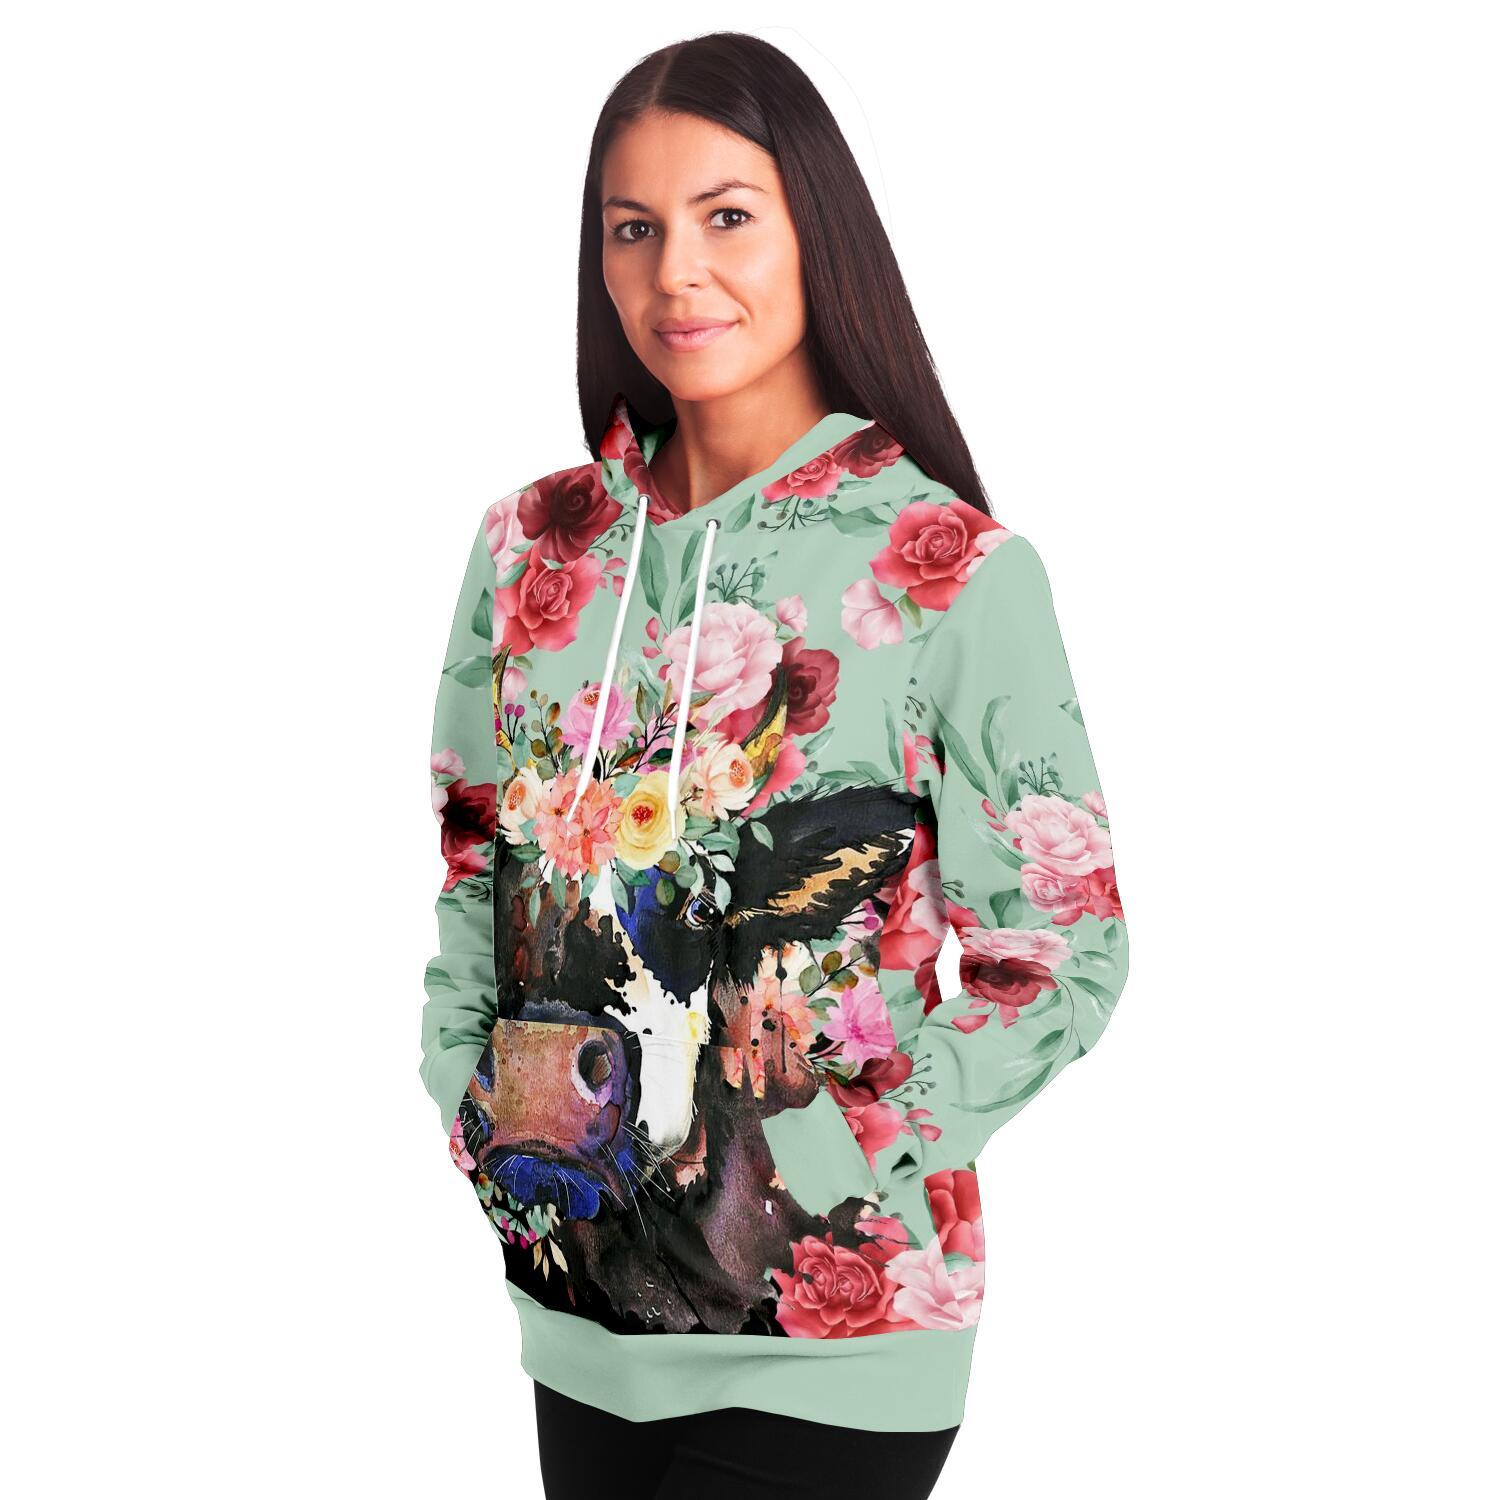 fashion hoodie aop mint floral cow hoodie 9 - The Cow Print